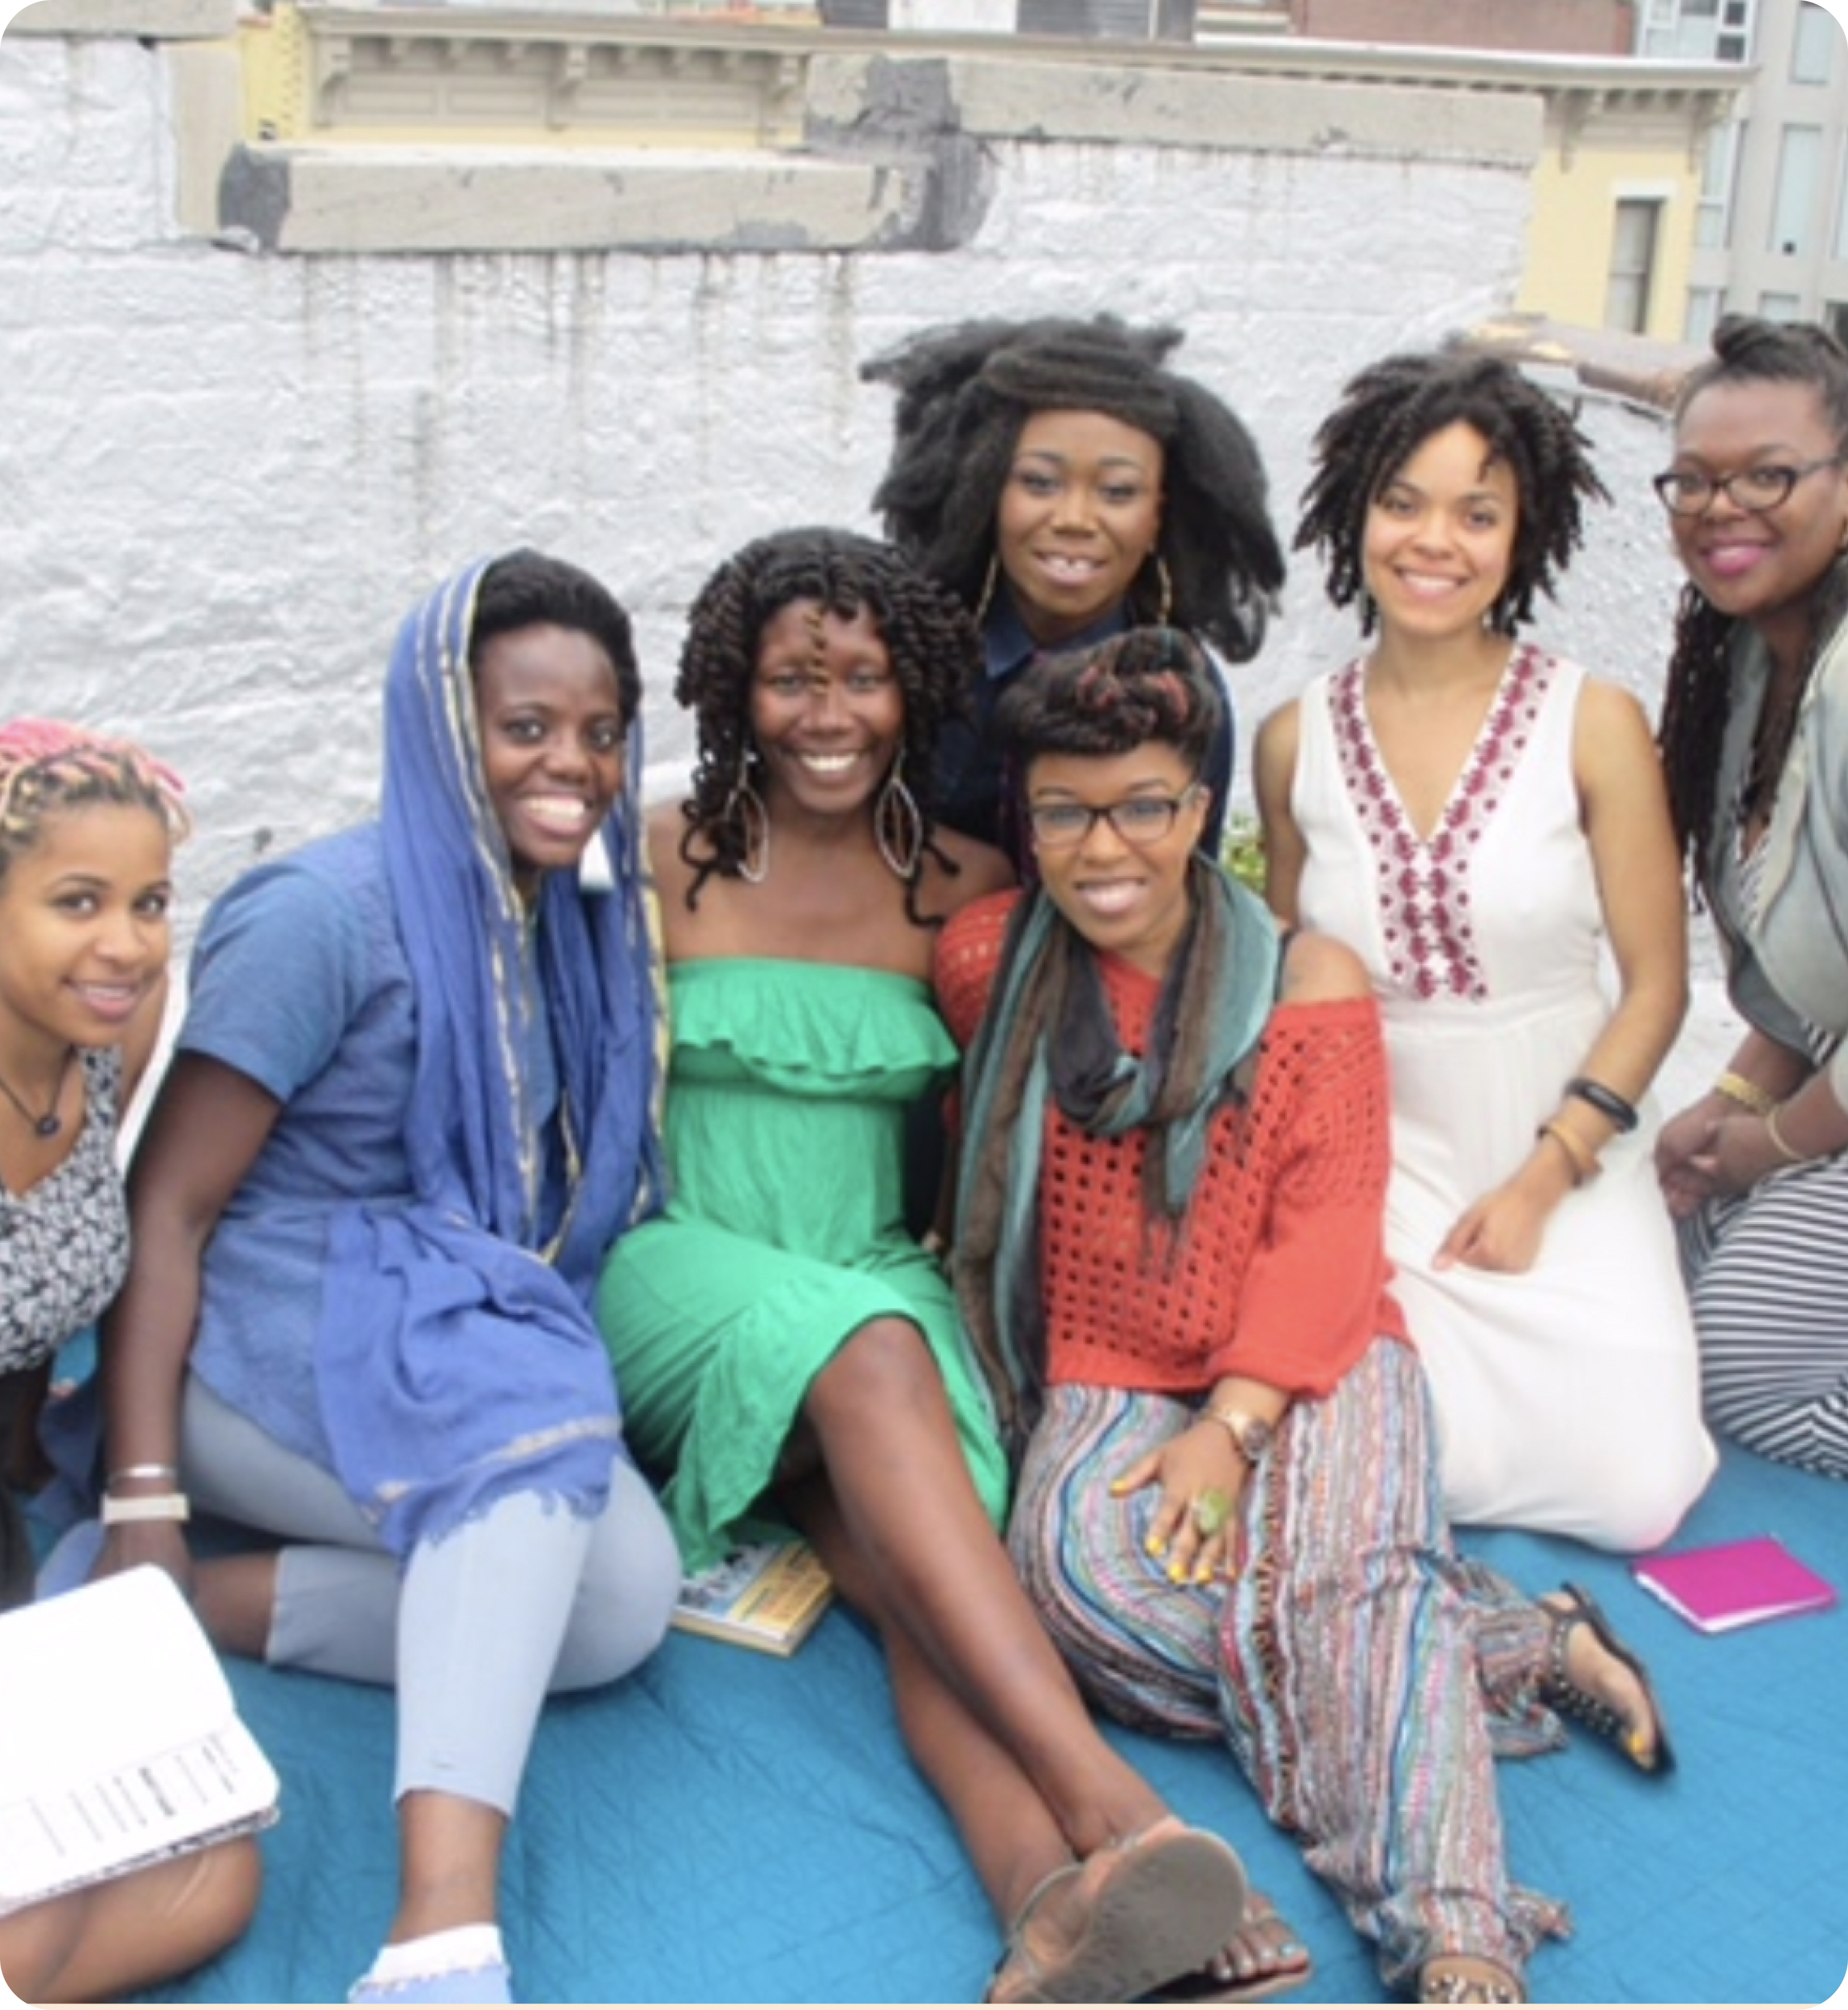 Nicole Dennis-Benn and Stuyvesant Writing Workshop participants on a roof top meeting.